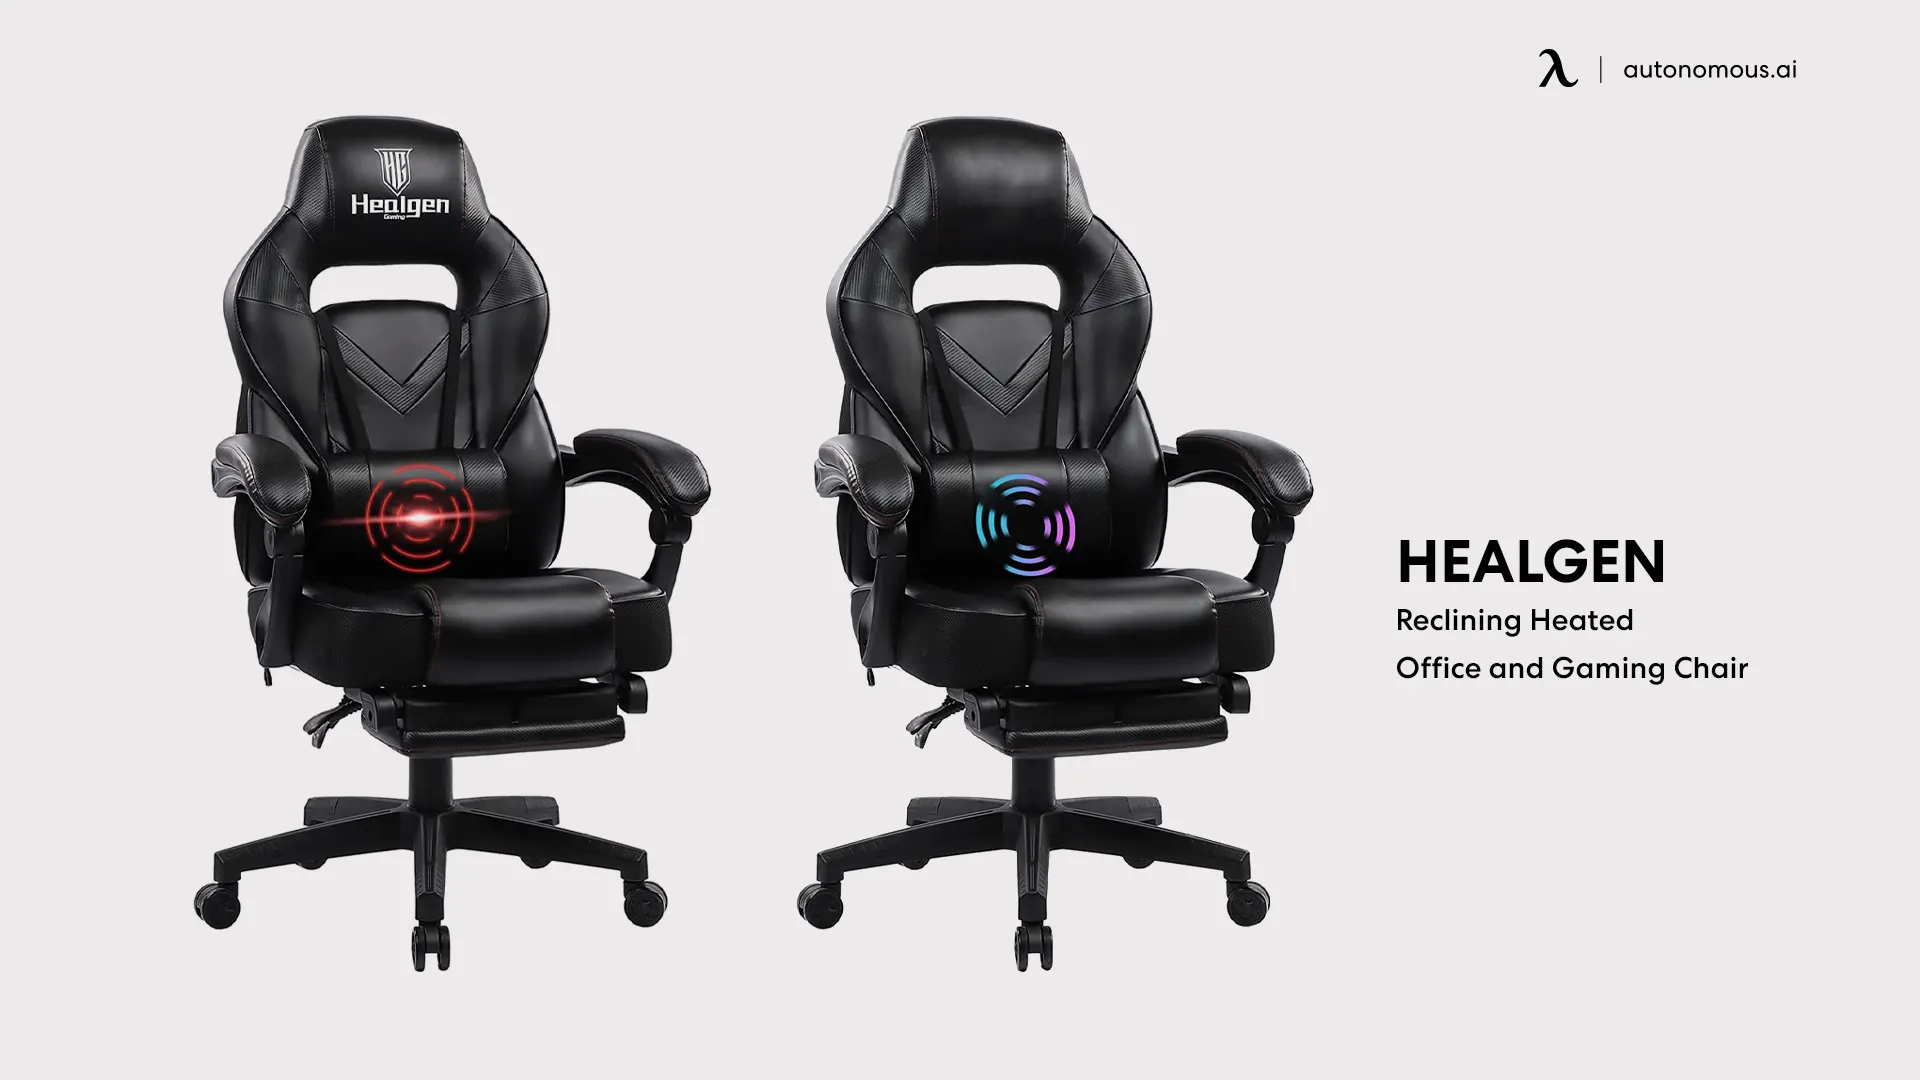 Healgen Reclining Heated Office and Gaming Chair